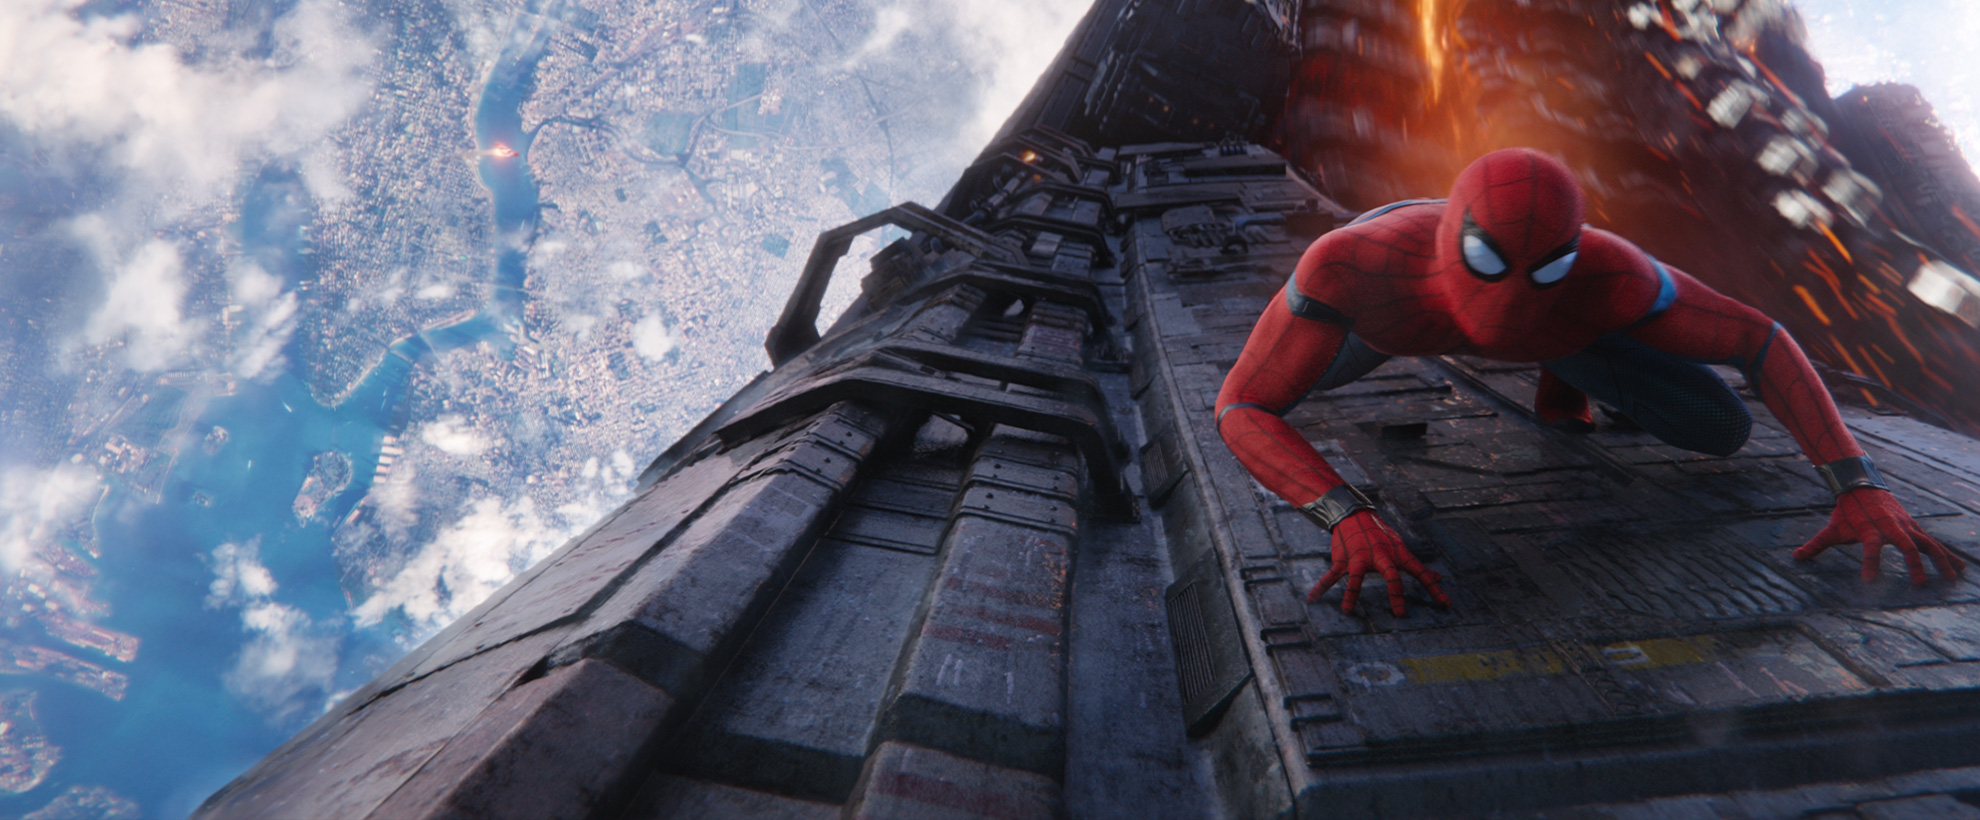 Spider-Man on a spaceship high above a city